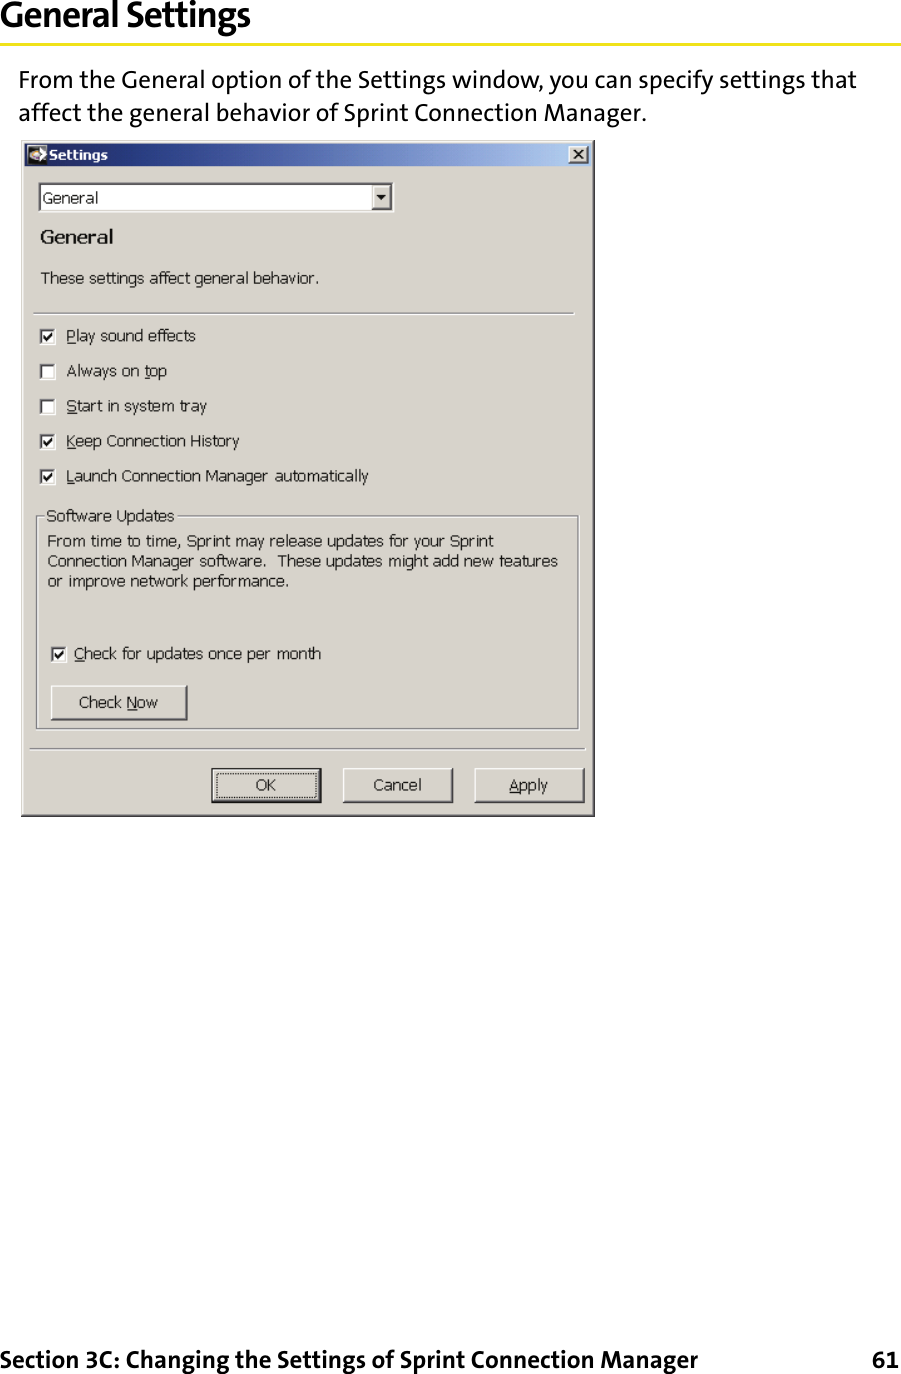 Section 3C: Changing the Settings of Sprint Connection Manager      61General SettingsFrom the General option of the Settings window, you can specify settings that affect the general behavior of Sprint Connection Manager.